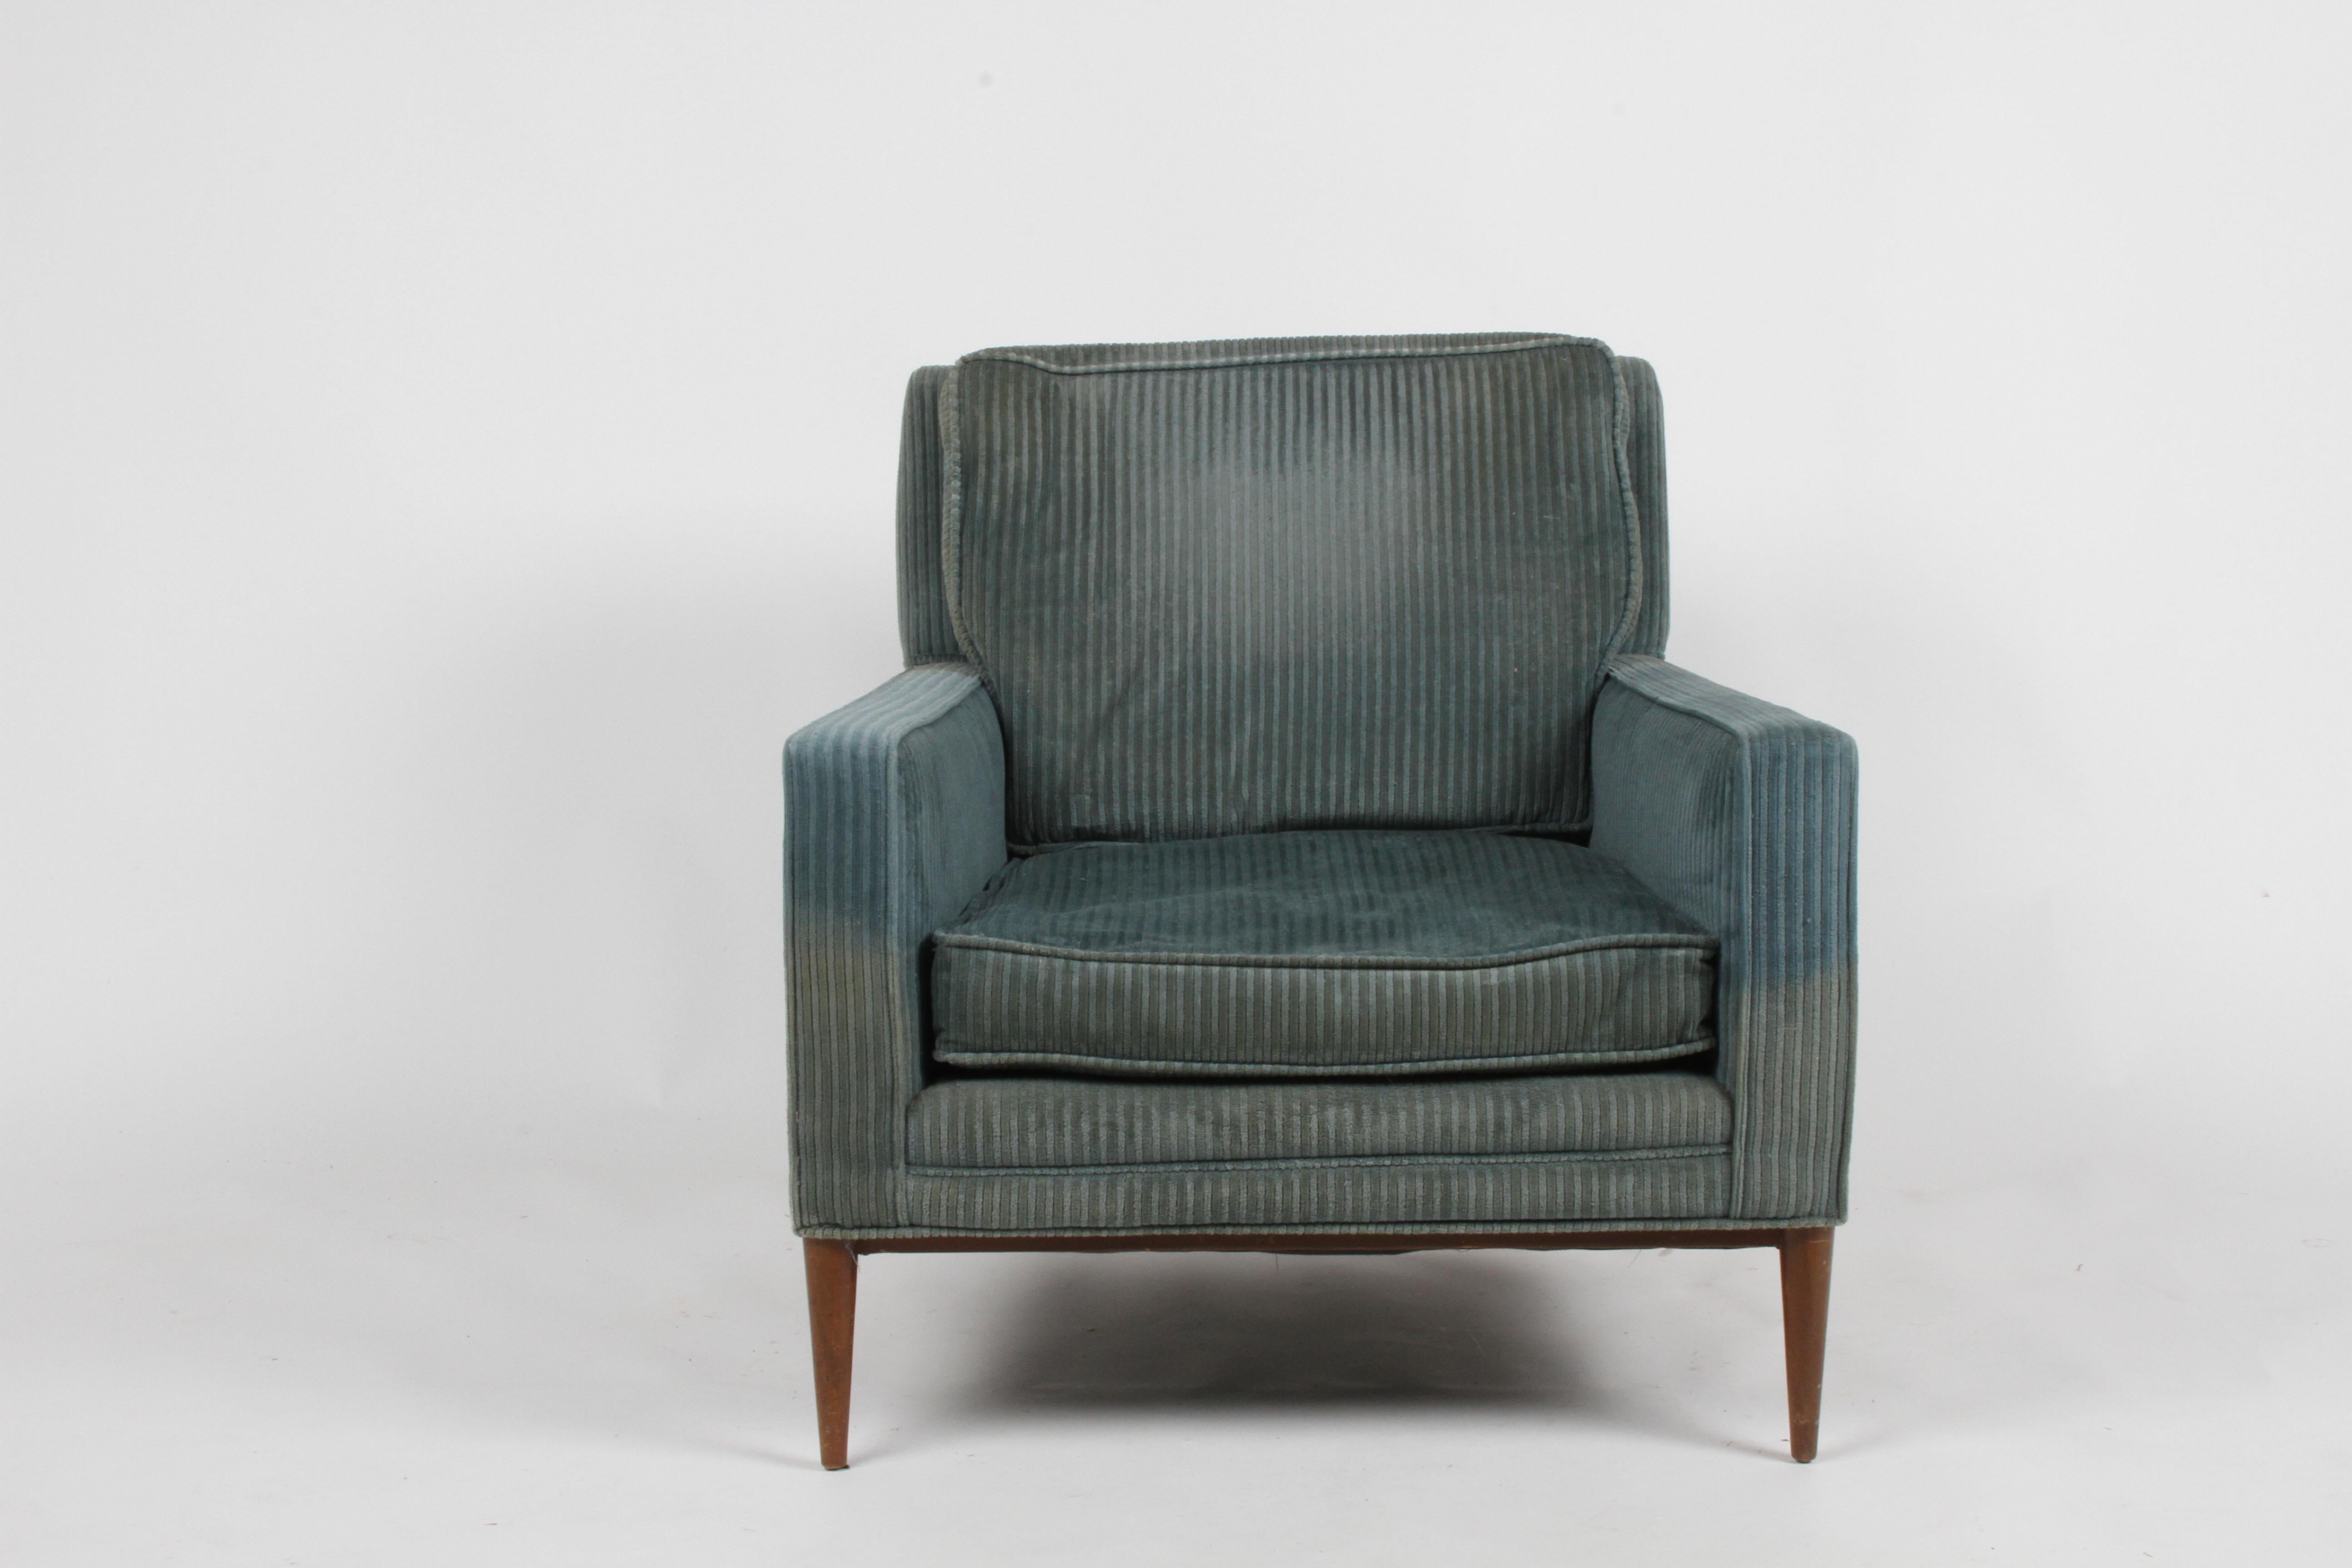 Mid-20th Century Paul McCobb Model 302 Mid-Century Modern Lounge or Club Chair for Directional